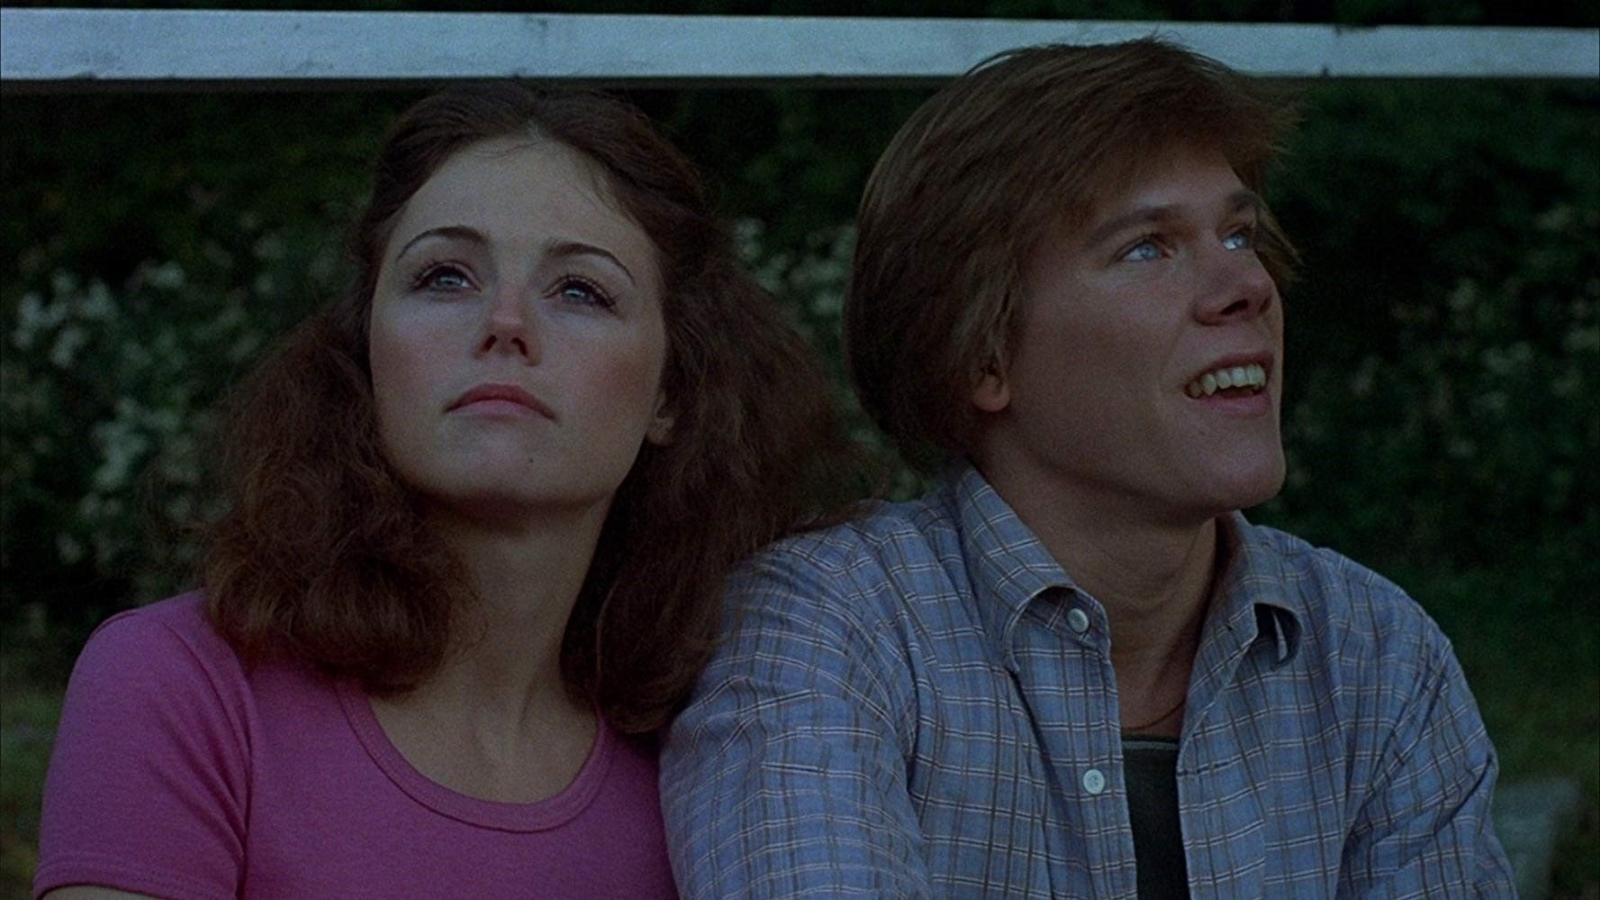 Kevin Bacon as Jack and Jeannine Taylor as Marcie in Friday the 13th